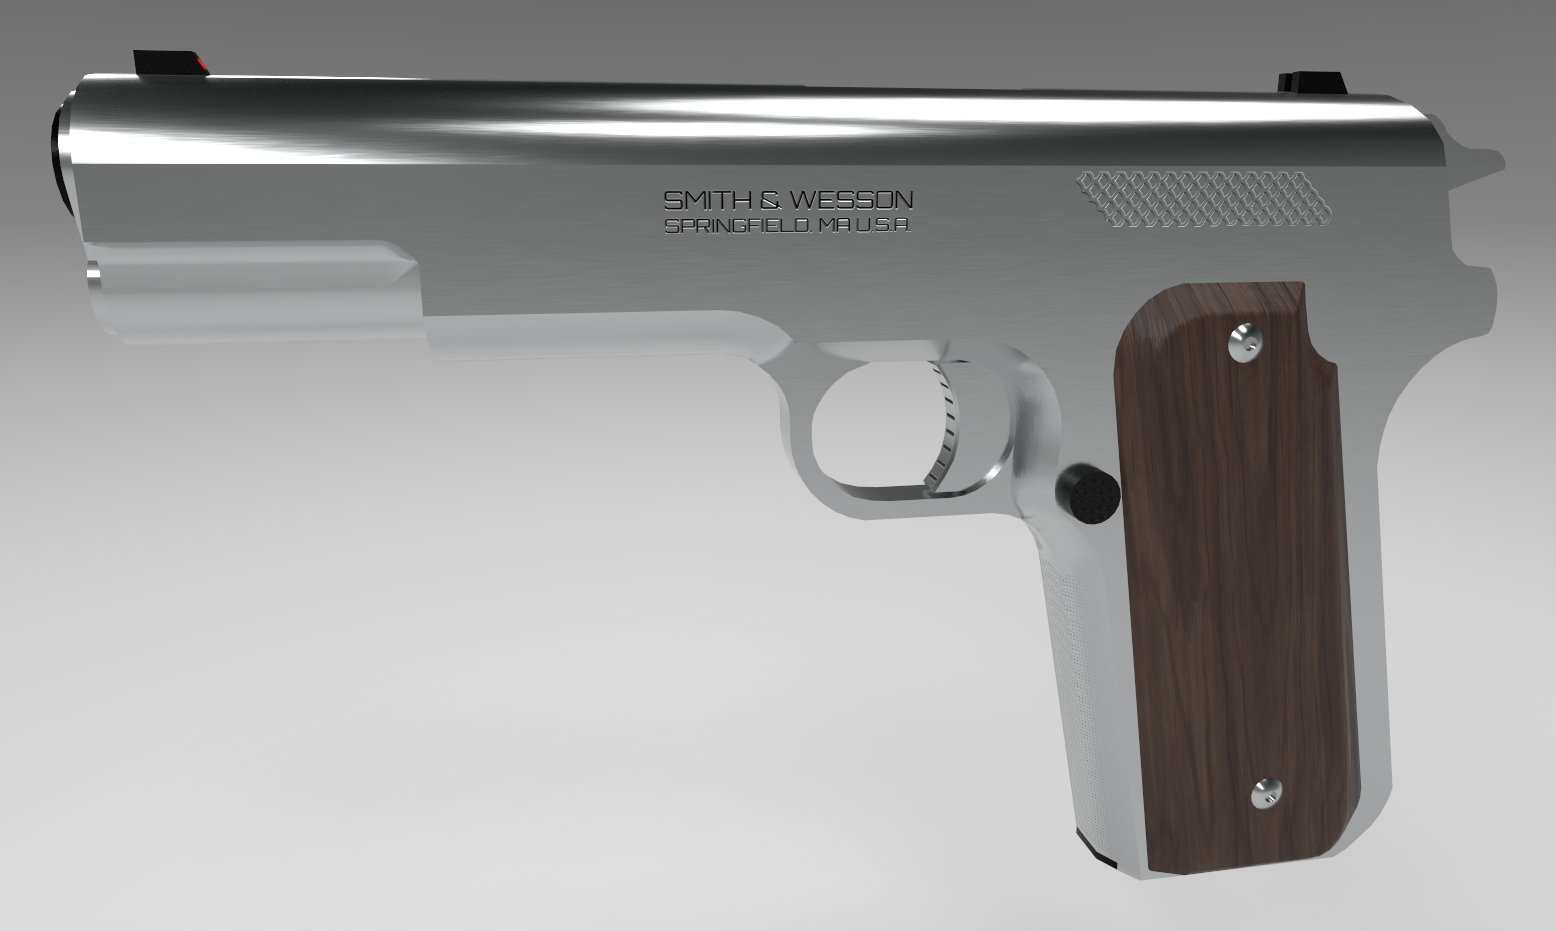 Another close up render of our high definition gun that the VR player uses.